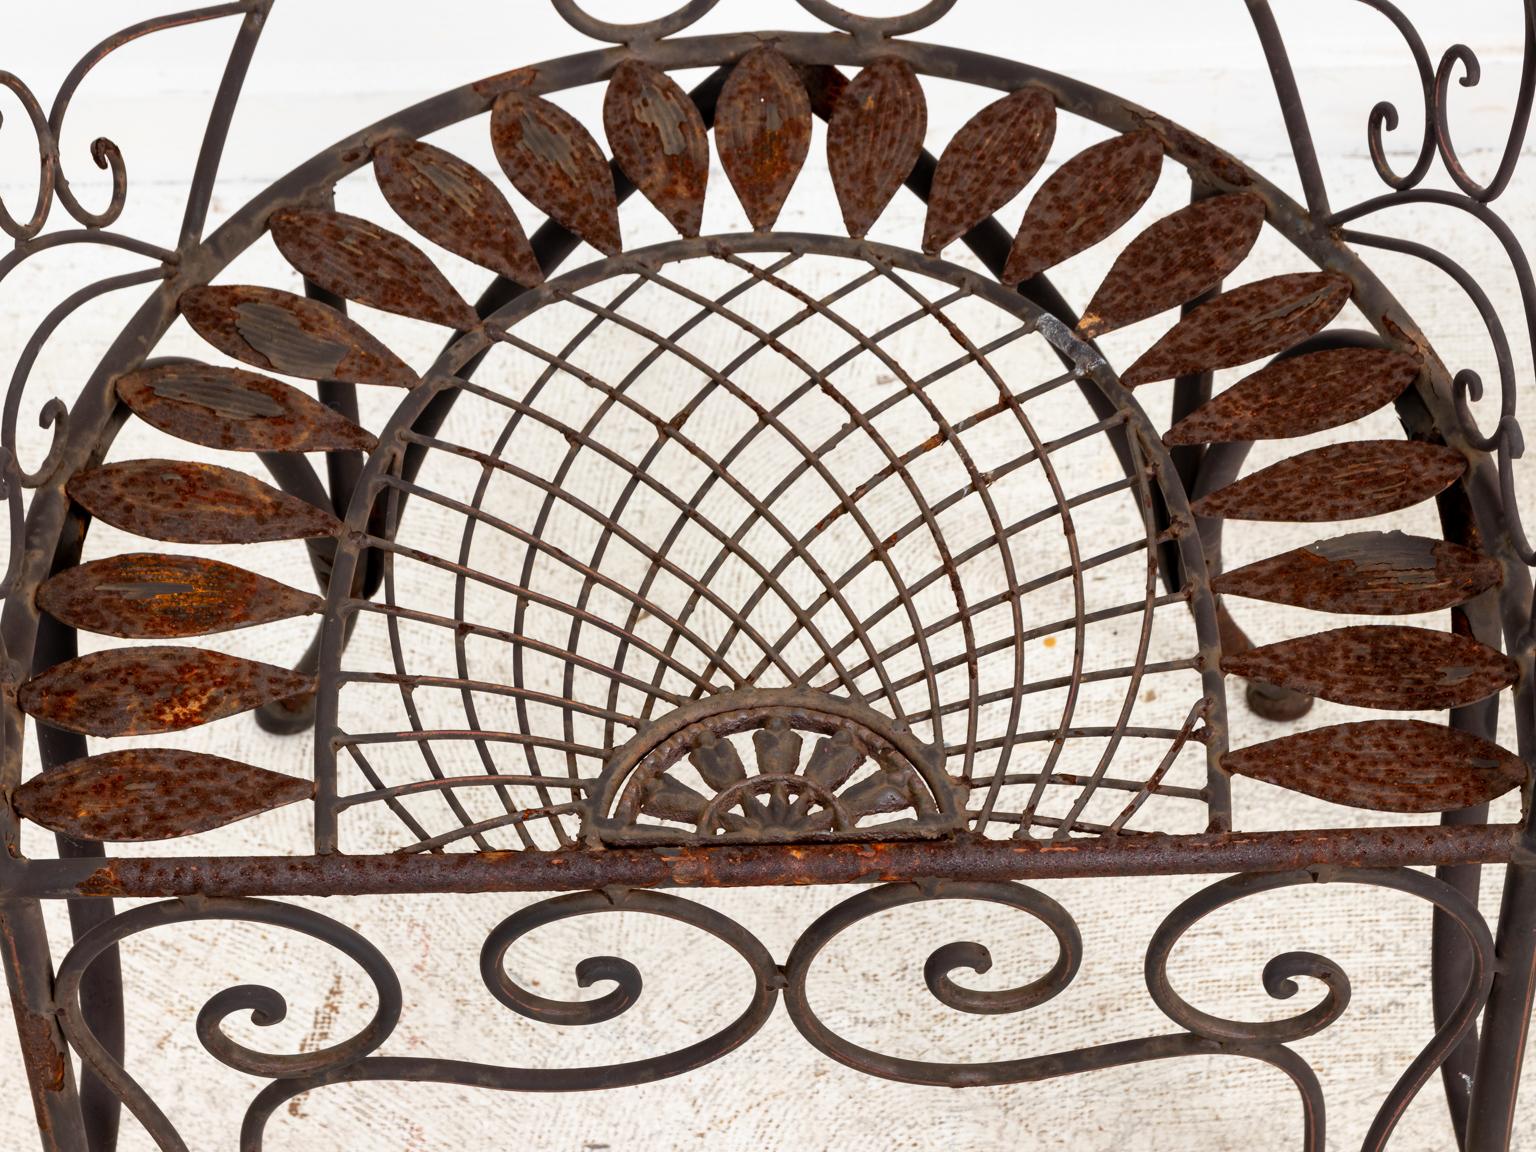 Pair of wrought iron curved back garden chairs with c-scroll detail on the seat back and front of the seat rail. The seat is further detailed with latticework and metal leaves in the shape of sunflower. Please note of wear consistent with age and